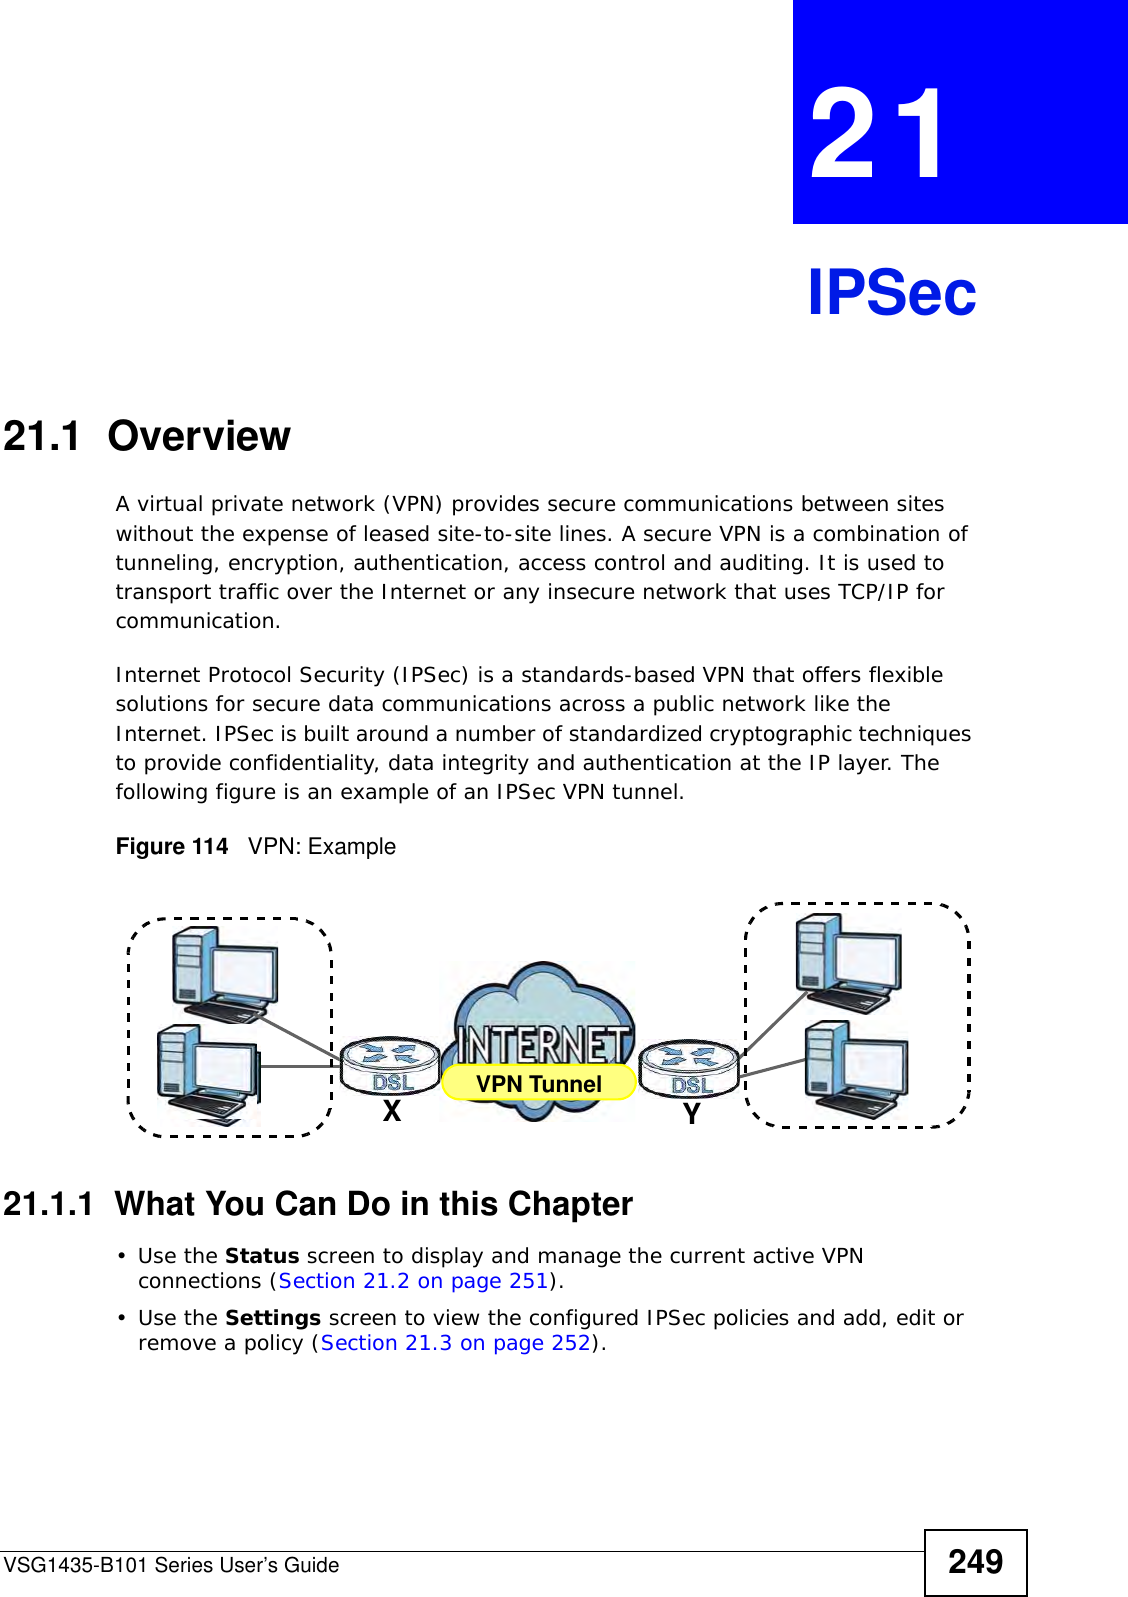 VSG1435-B101 Series User’s Guide 249CHAPTER  21 IPSec21.1  OverviewA virtual private network (VPN) provides secure communications between sites without the expense of leased site-to-site lines. A secure VPN is a combination of tunneling, encryption, authentication, access control and auditing. It is used to transport traffic over the Internet or any insecure network that uses TCP/IP for communication.Internet Protocol Security (IPSec) is a standards-based VPN that offers flexible solutions for secure data communications across a public network like the Internet. IPSec is built around a number of standardized cryptographic techniques to provide confidentiality, data integrity and authentication at the IP layer. The following figure is an example of an IPSec VPN tunnel.Figure 114   VPN: Example21.1.1  What You Can Do in this Chapter•Use the Status screen to display and manage the current active VPN connections (Section 21.2 on page 251).•Use the Settings screen to view the configured IPSec policies and add, edit or remove a policy (Section 21.3 on page 252).VPN TunnelXY